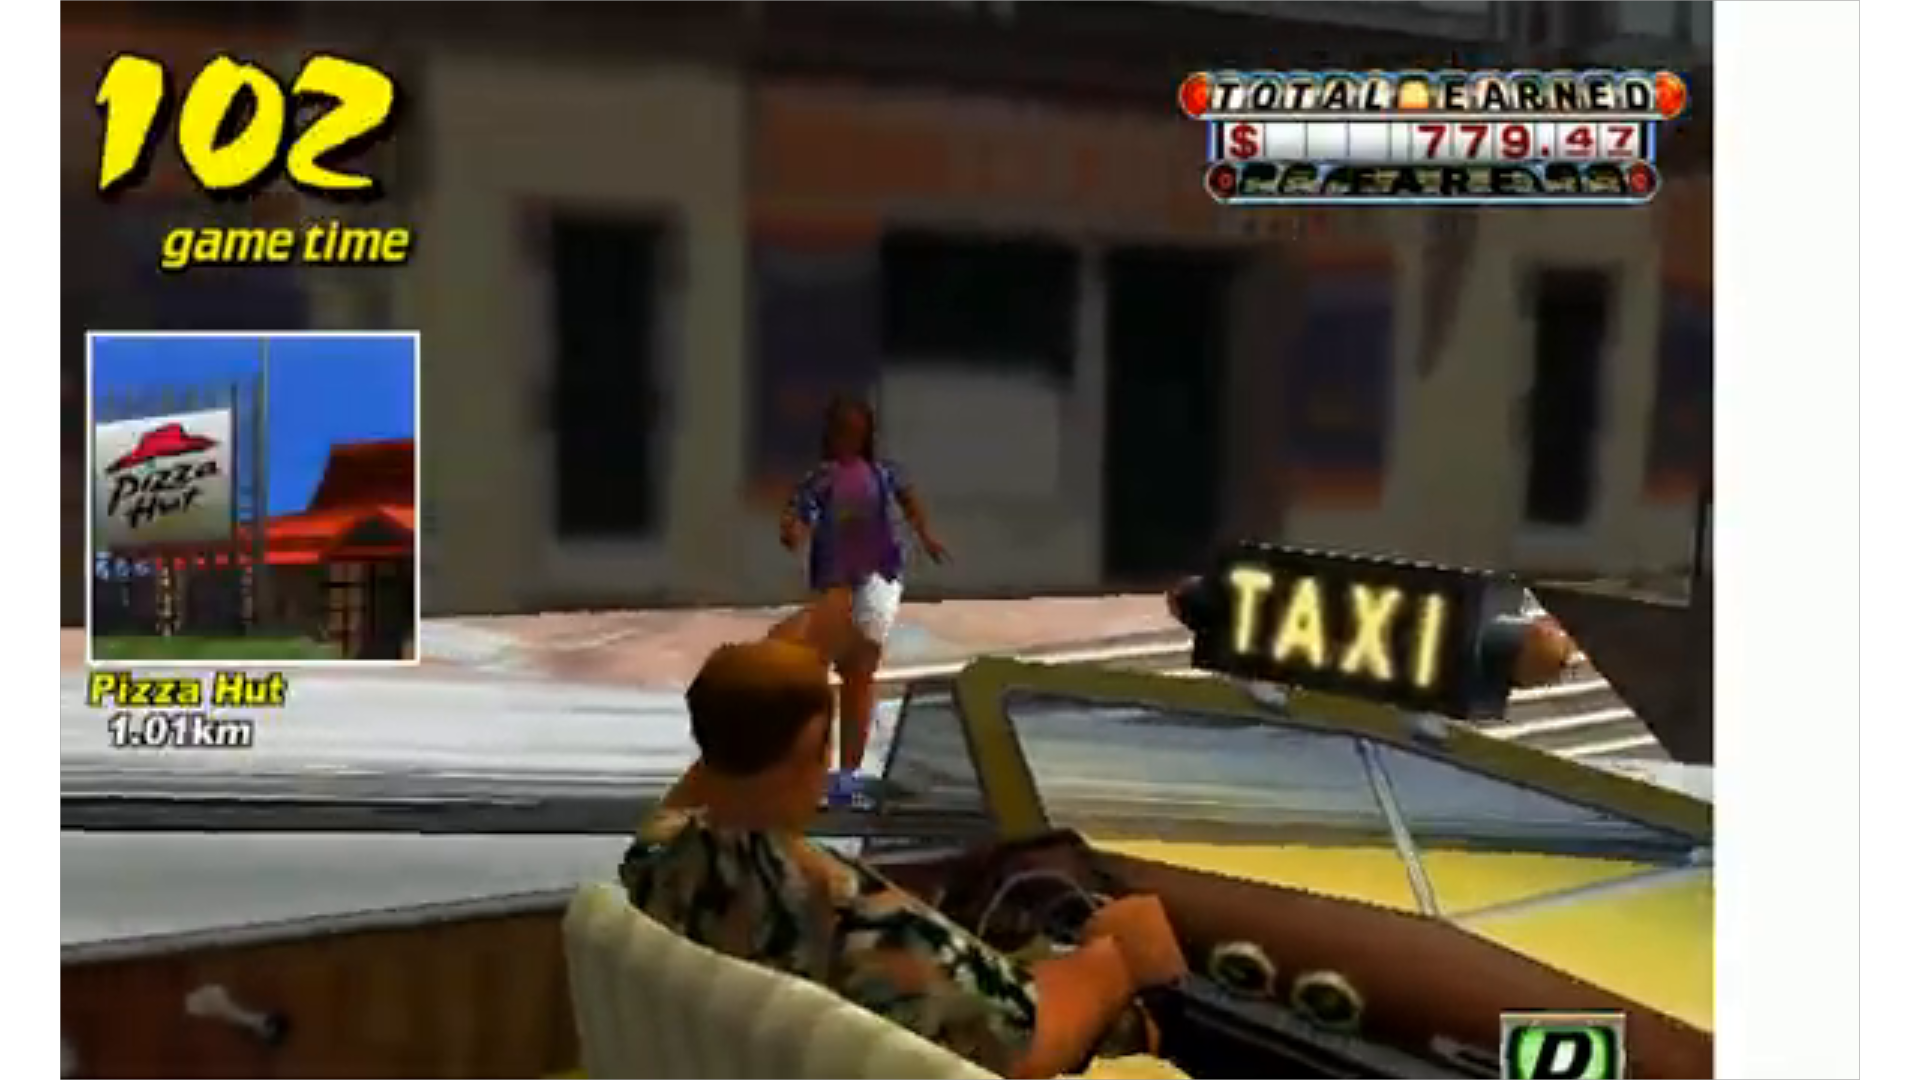 crazy taxi arcade with pizza hut